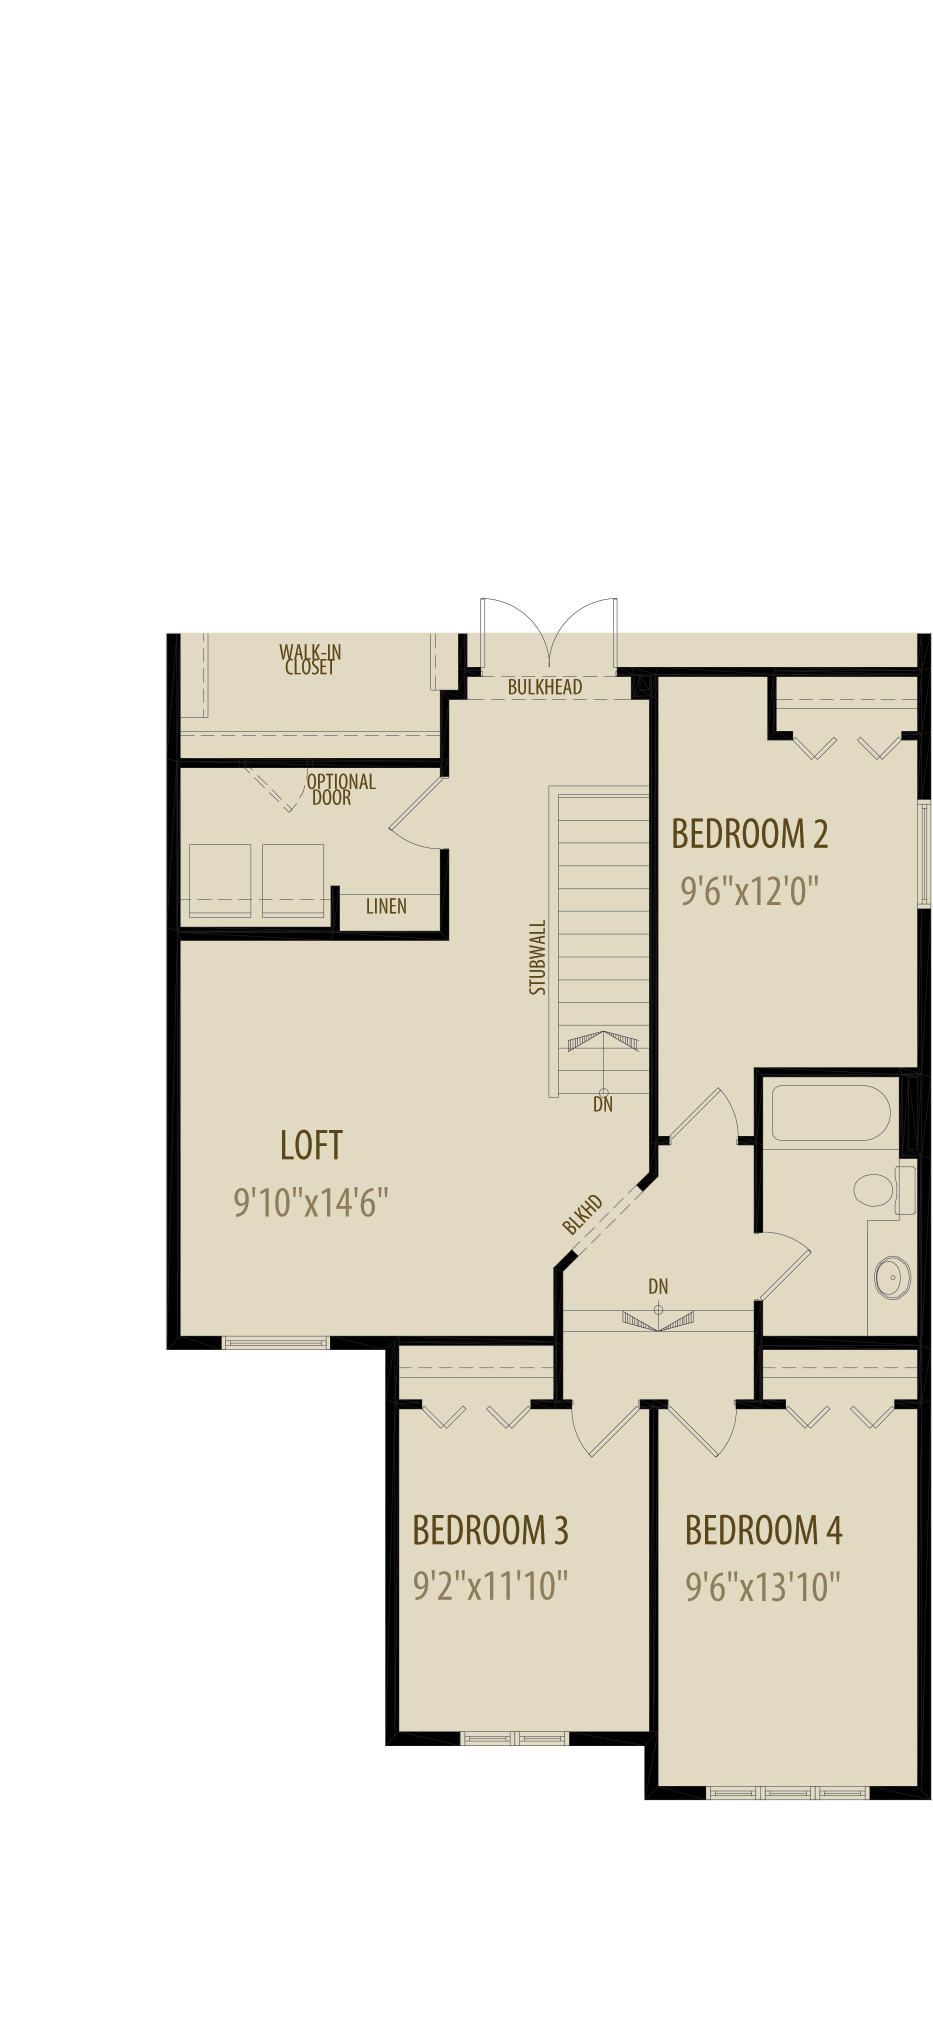 4Th Bedroom And Loft